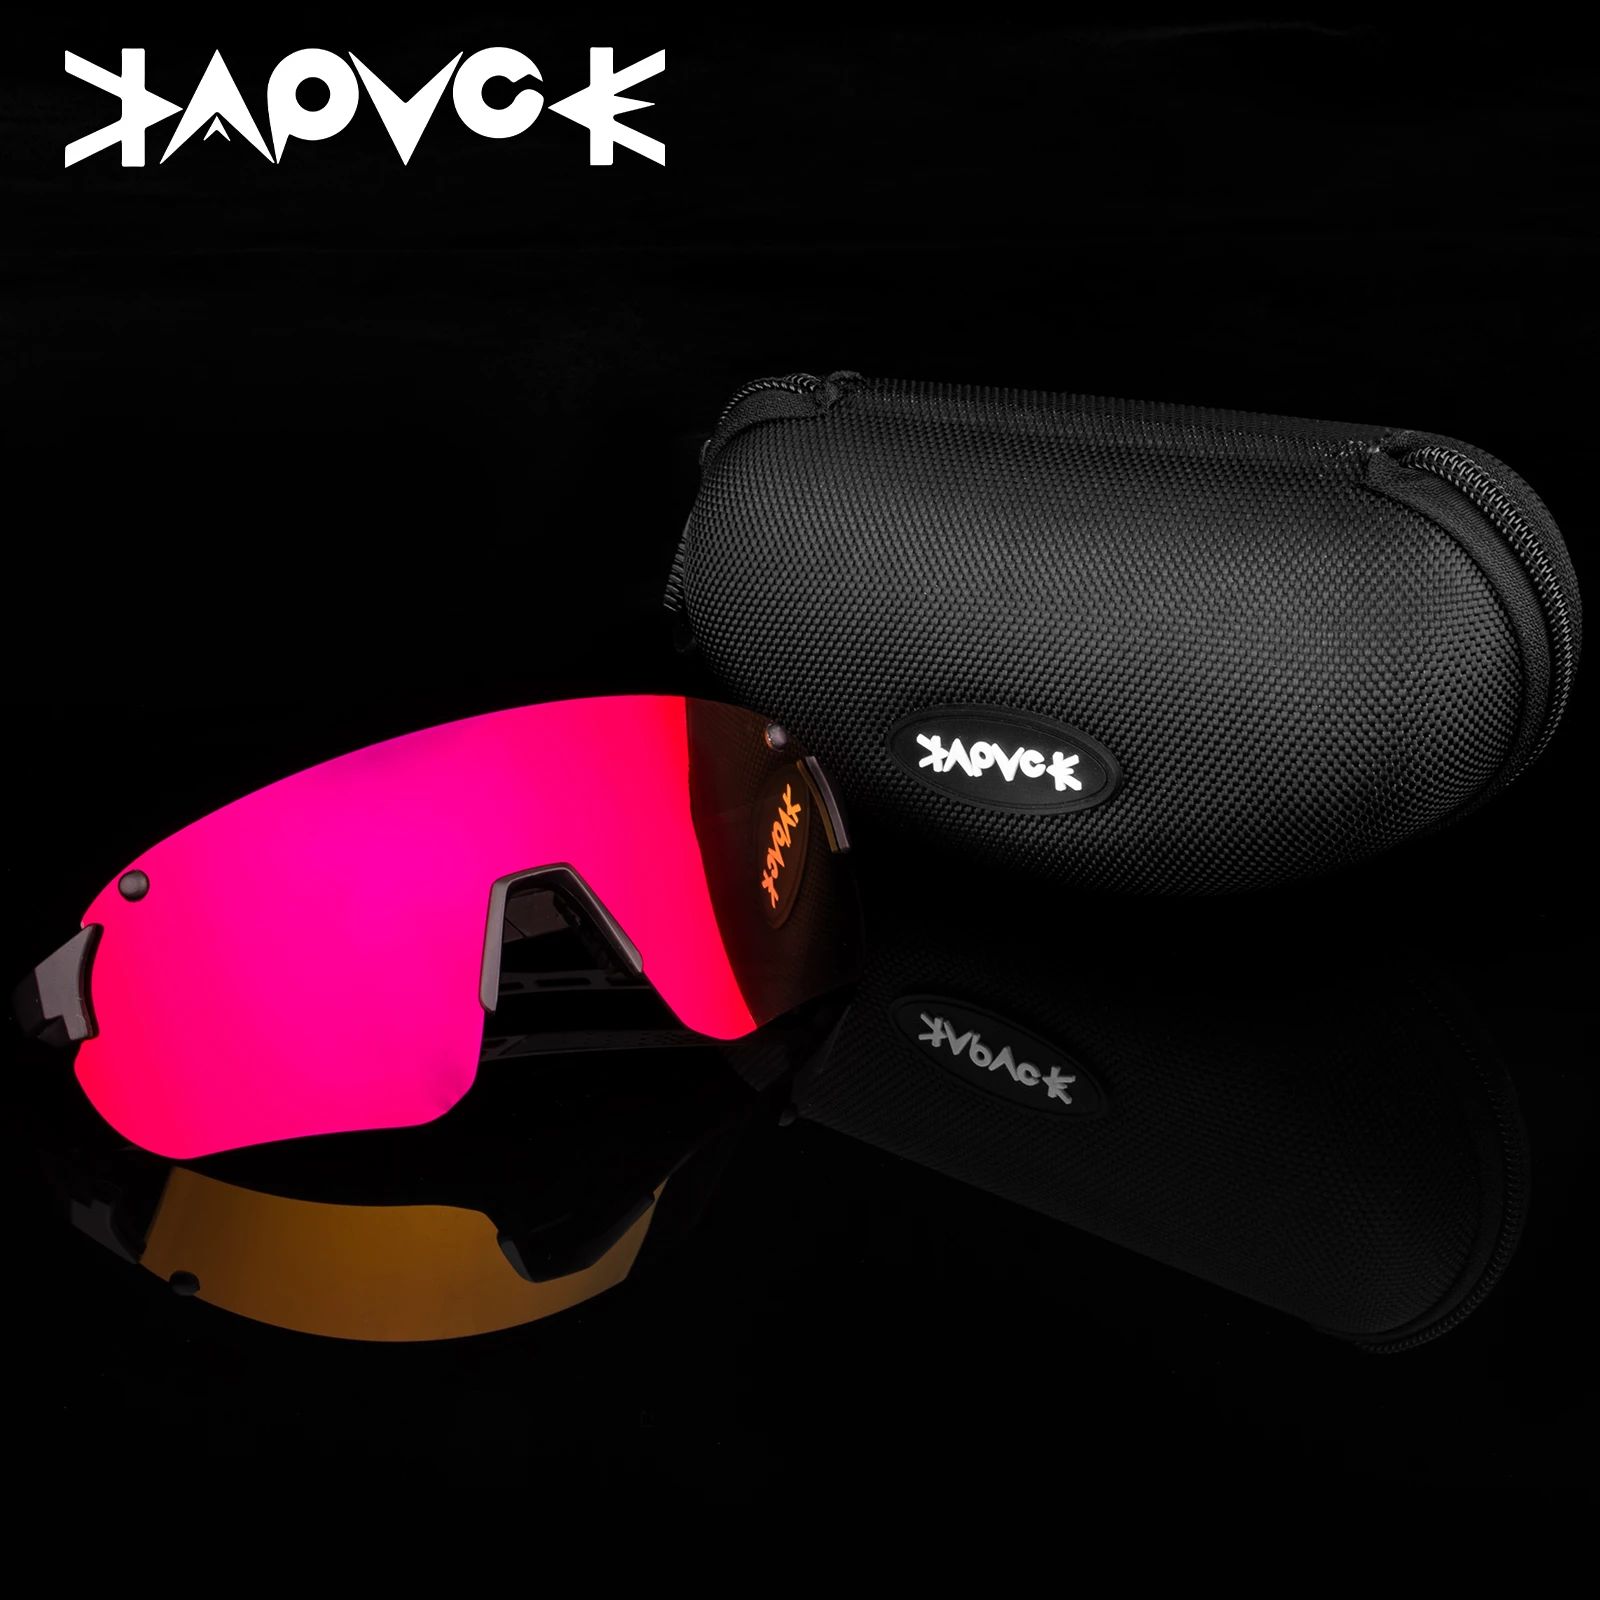 Outdoor Photochromic UV400 Cycling glasses cycling sunglasses sport sunglasses bike glasses oculos ciclismo with Myopia frame